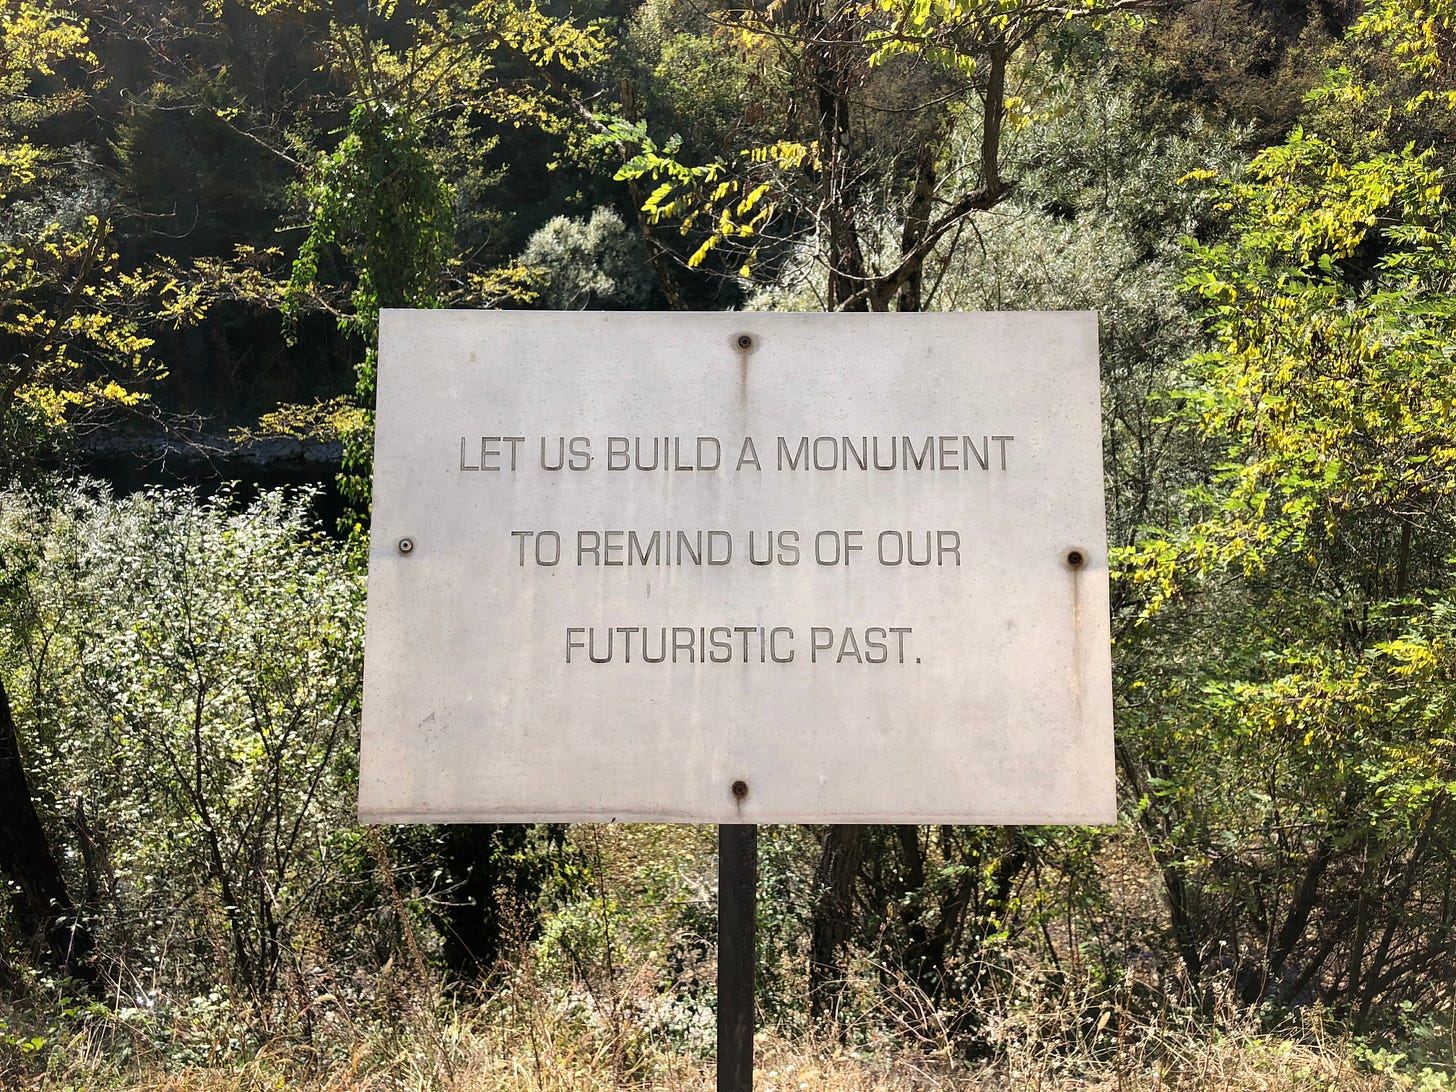 “Let us build a monument to remind us of our futuristic past.” – an installation by Egyptian artist Basim Magdy, outside the ARK/D-0 bunker in Konjic, Bosnia & Herzegovina.